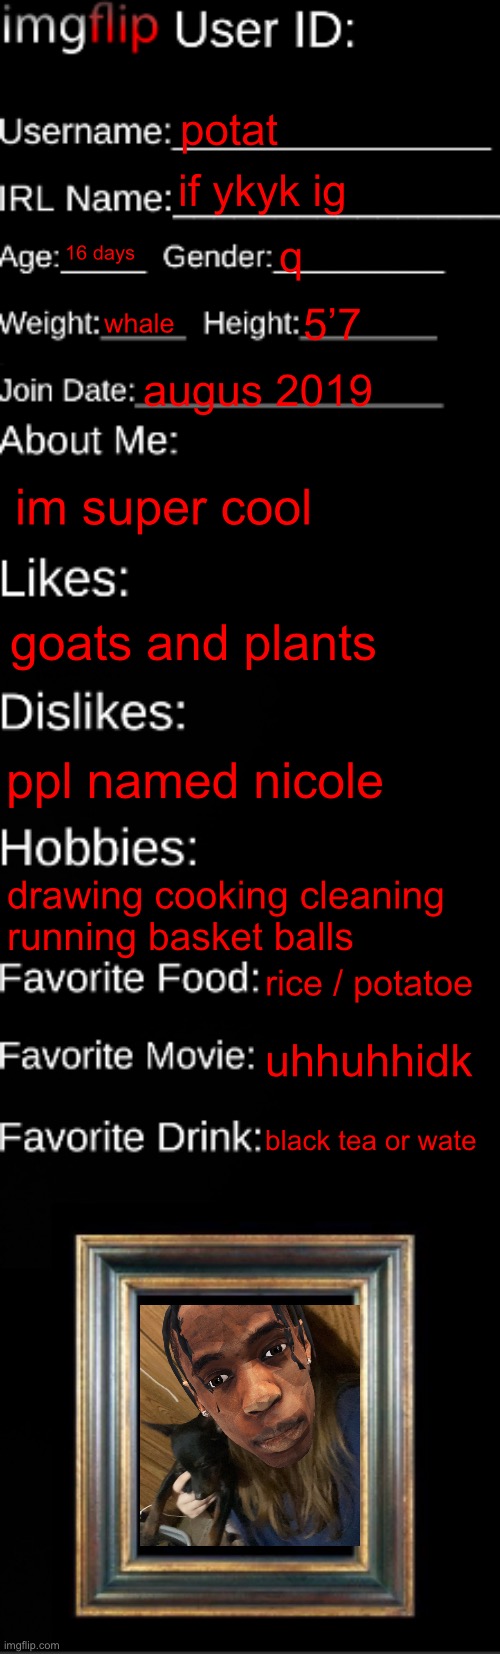 I did the | potat; if ykyk ig; 16 days; q; whale; 5’7; augus 2019; im super cool; goats and plants; ppl named nicole; drawing cooking cleaning running basket balls; rice / potatoe; uhhuhhidk; black tea or wate | image tagged in imgflip id card | made w/ Imgflip meme maker